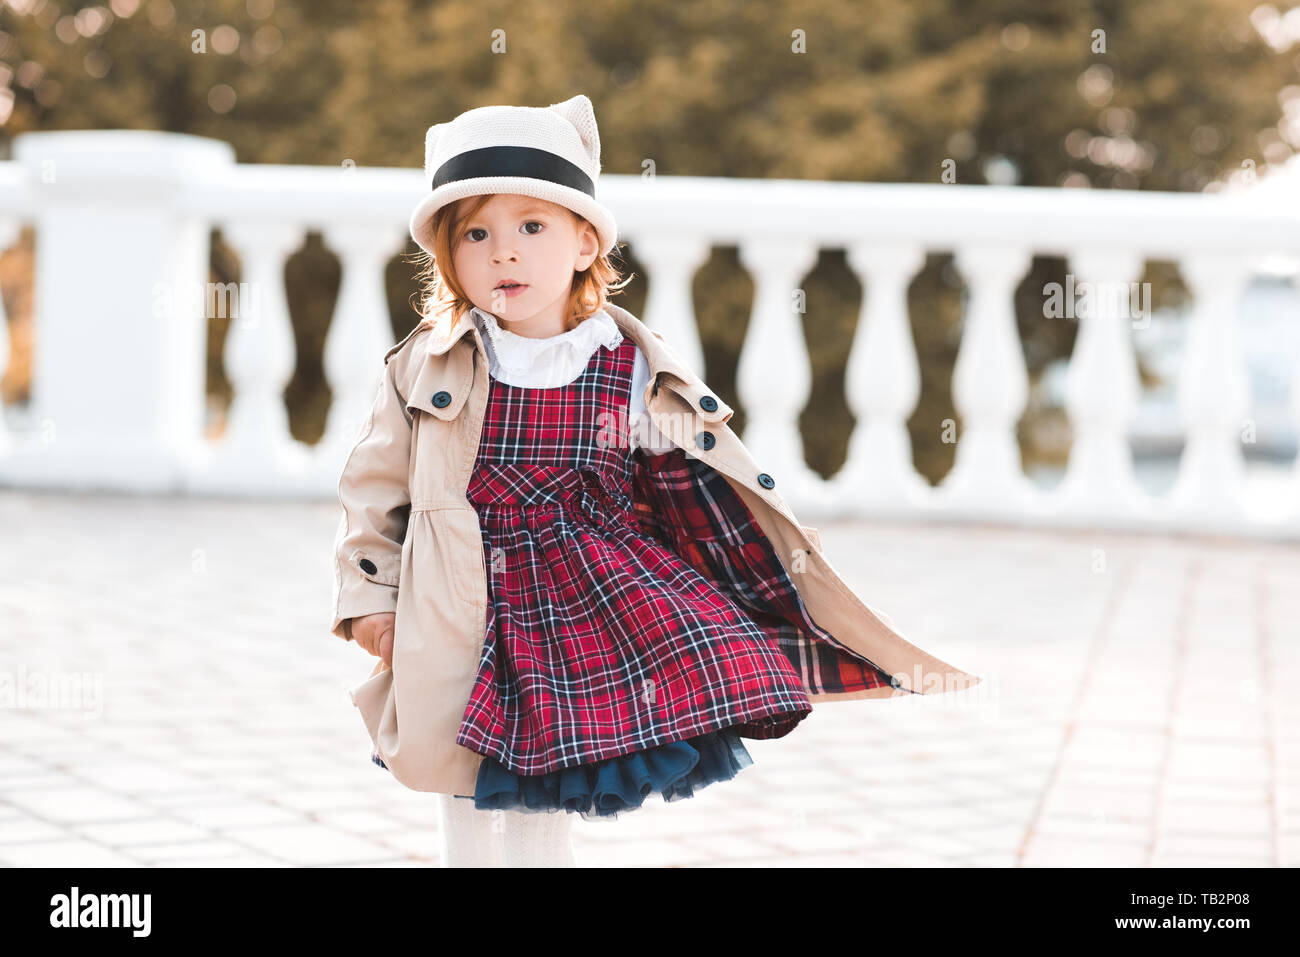 Stylish kid girl 1-2 year old wearing dress and jacket over city